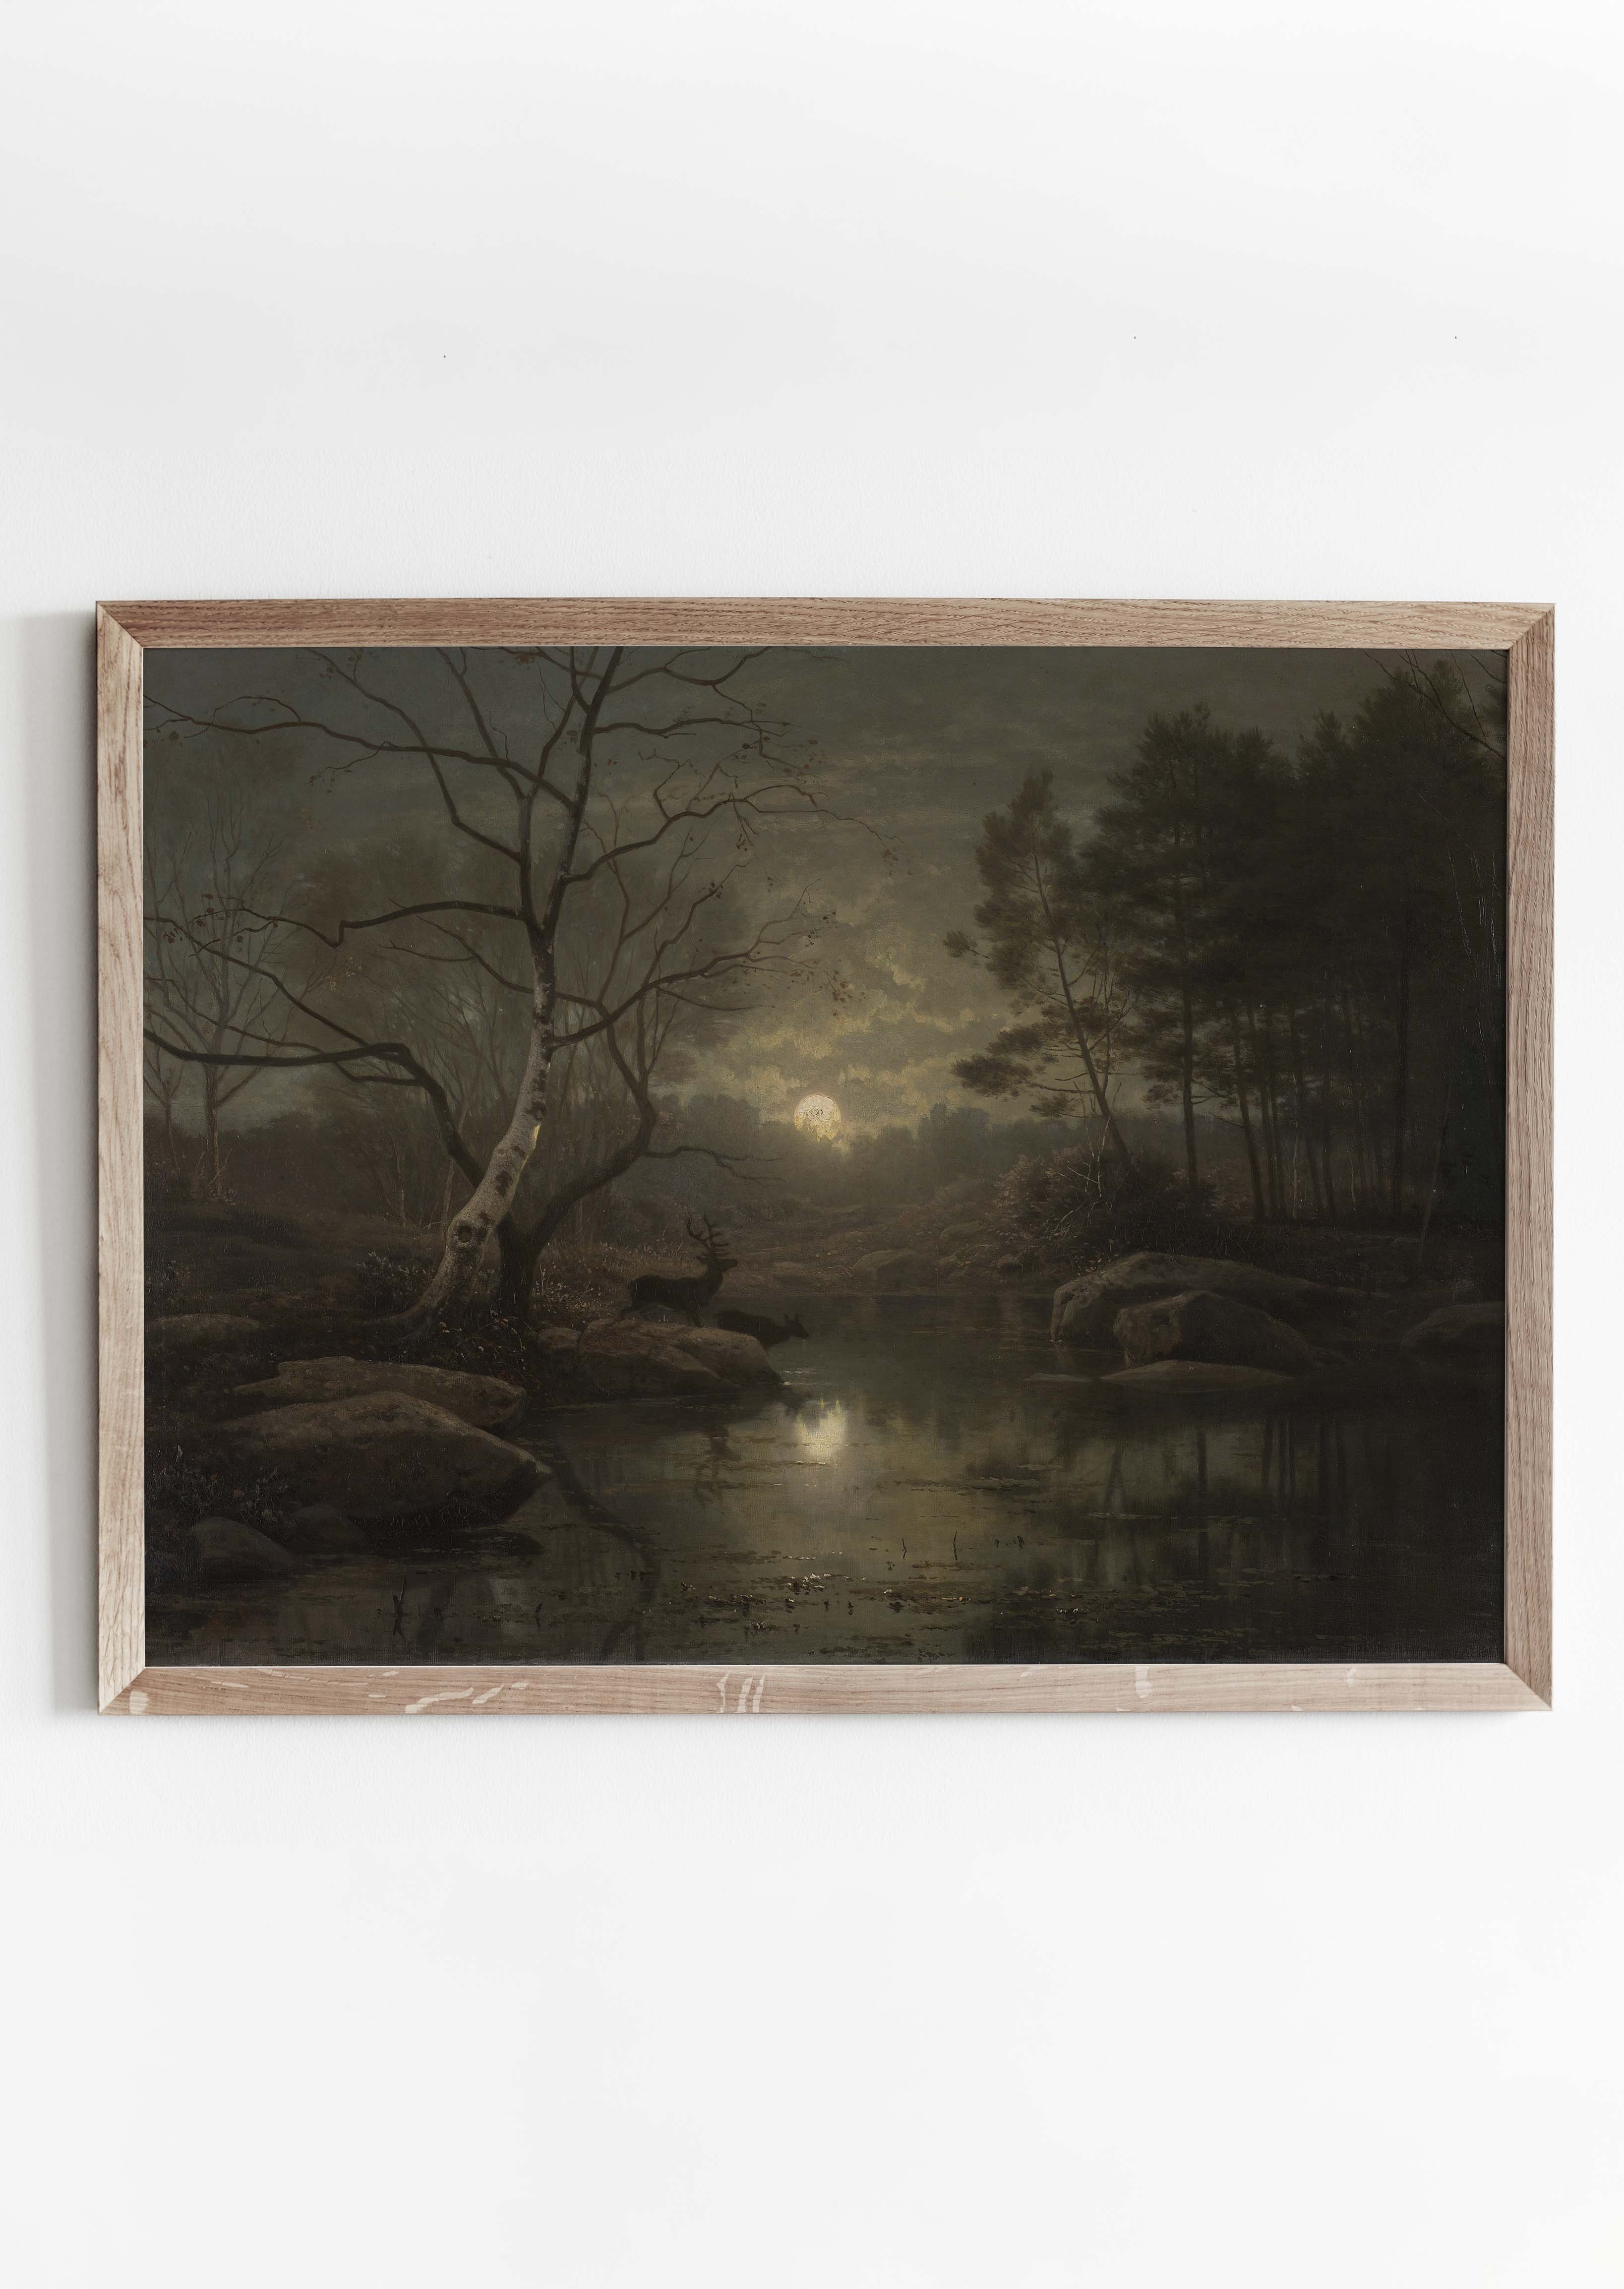 This original artwork "Forest Landscape in the Moonlight" was painted by the German artist Georg Eduard Otto Saal